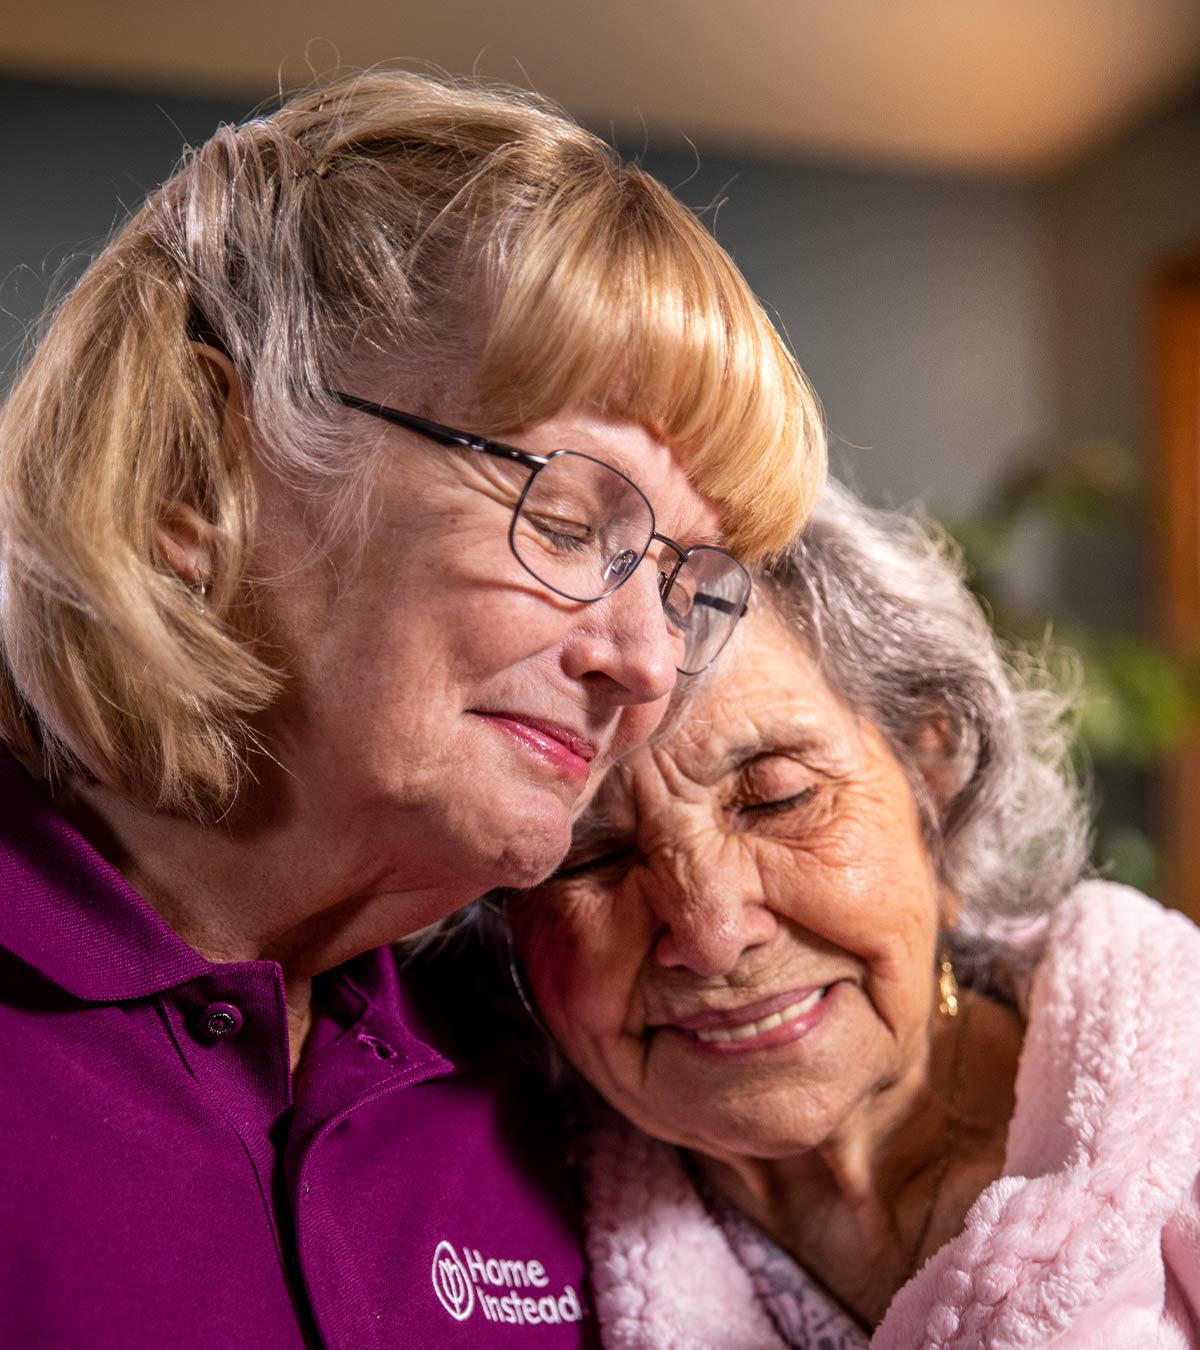 CAREGiver providing in-home senior care services. Home Instead of Lima, OH provides Elder Care to aging adults. 